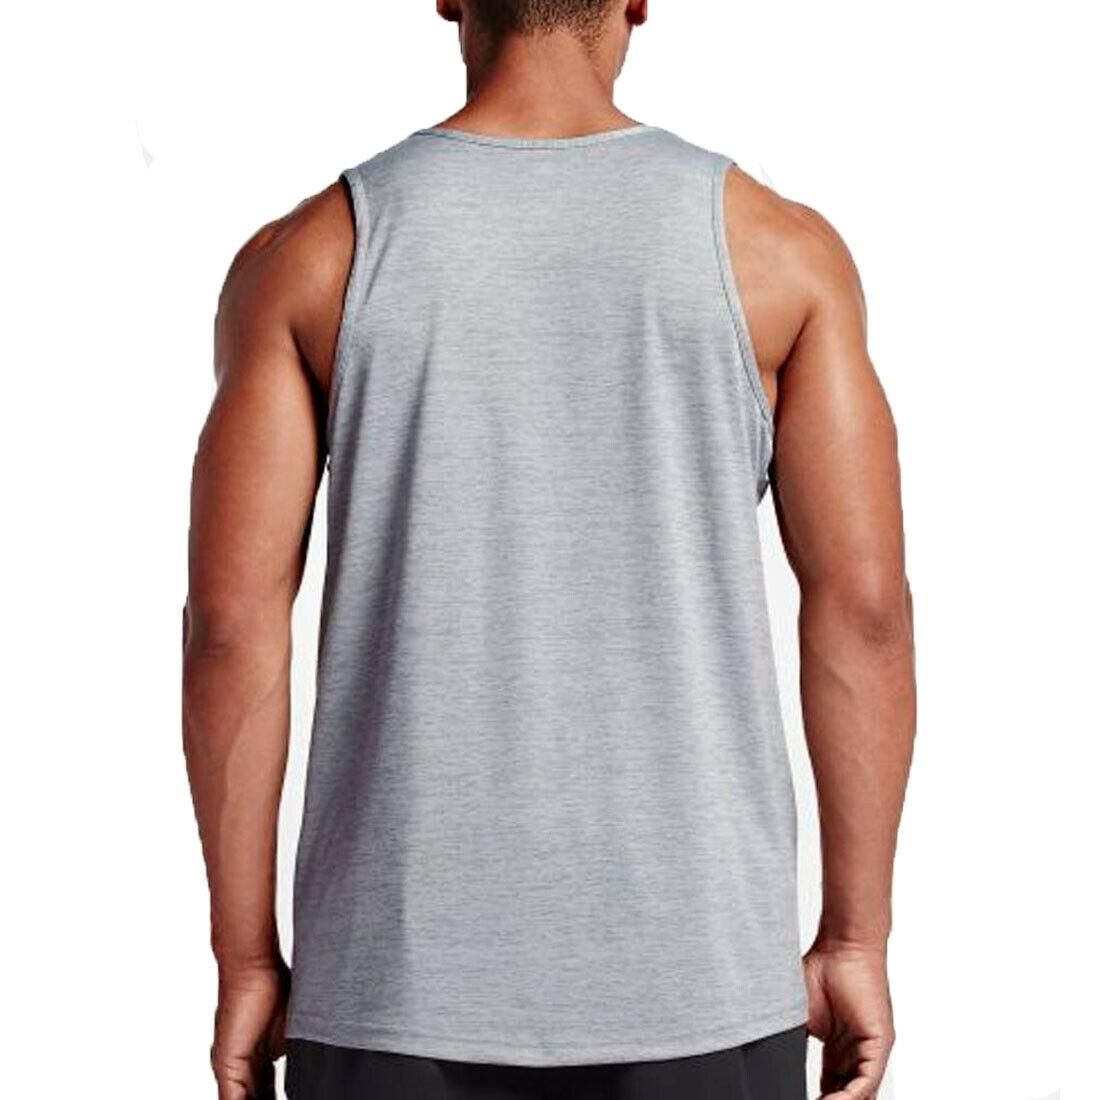 Nike Mens Sleeveless Tank Top.       
Athletic Cut, Classic Style.      
Crew Neck Muscle Tank Ideal for Sports and Casual Wear, It Features a Bold Retro Look.      
Soft-Touch Jersey Crew Neck Logo Print Regular Fit.      
Breathable Cotton, Crew Neck, Printed Design.      
Regular Fit - True to Size.      
Nike Retro Big Logo Embroidered Swoosh Vest.